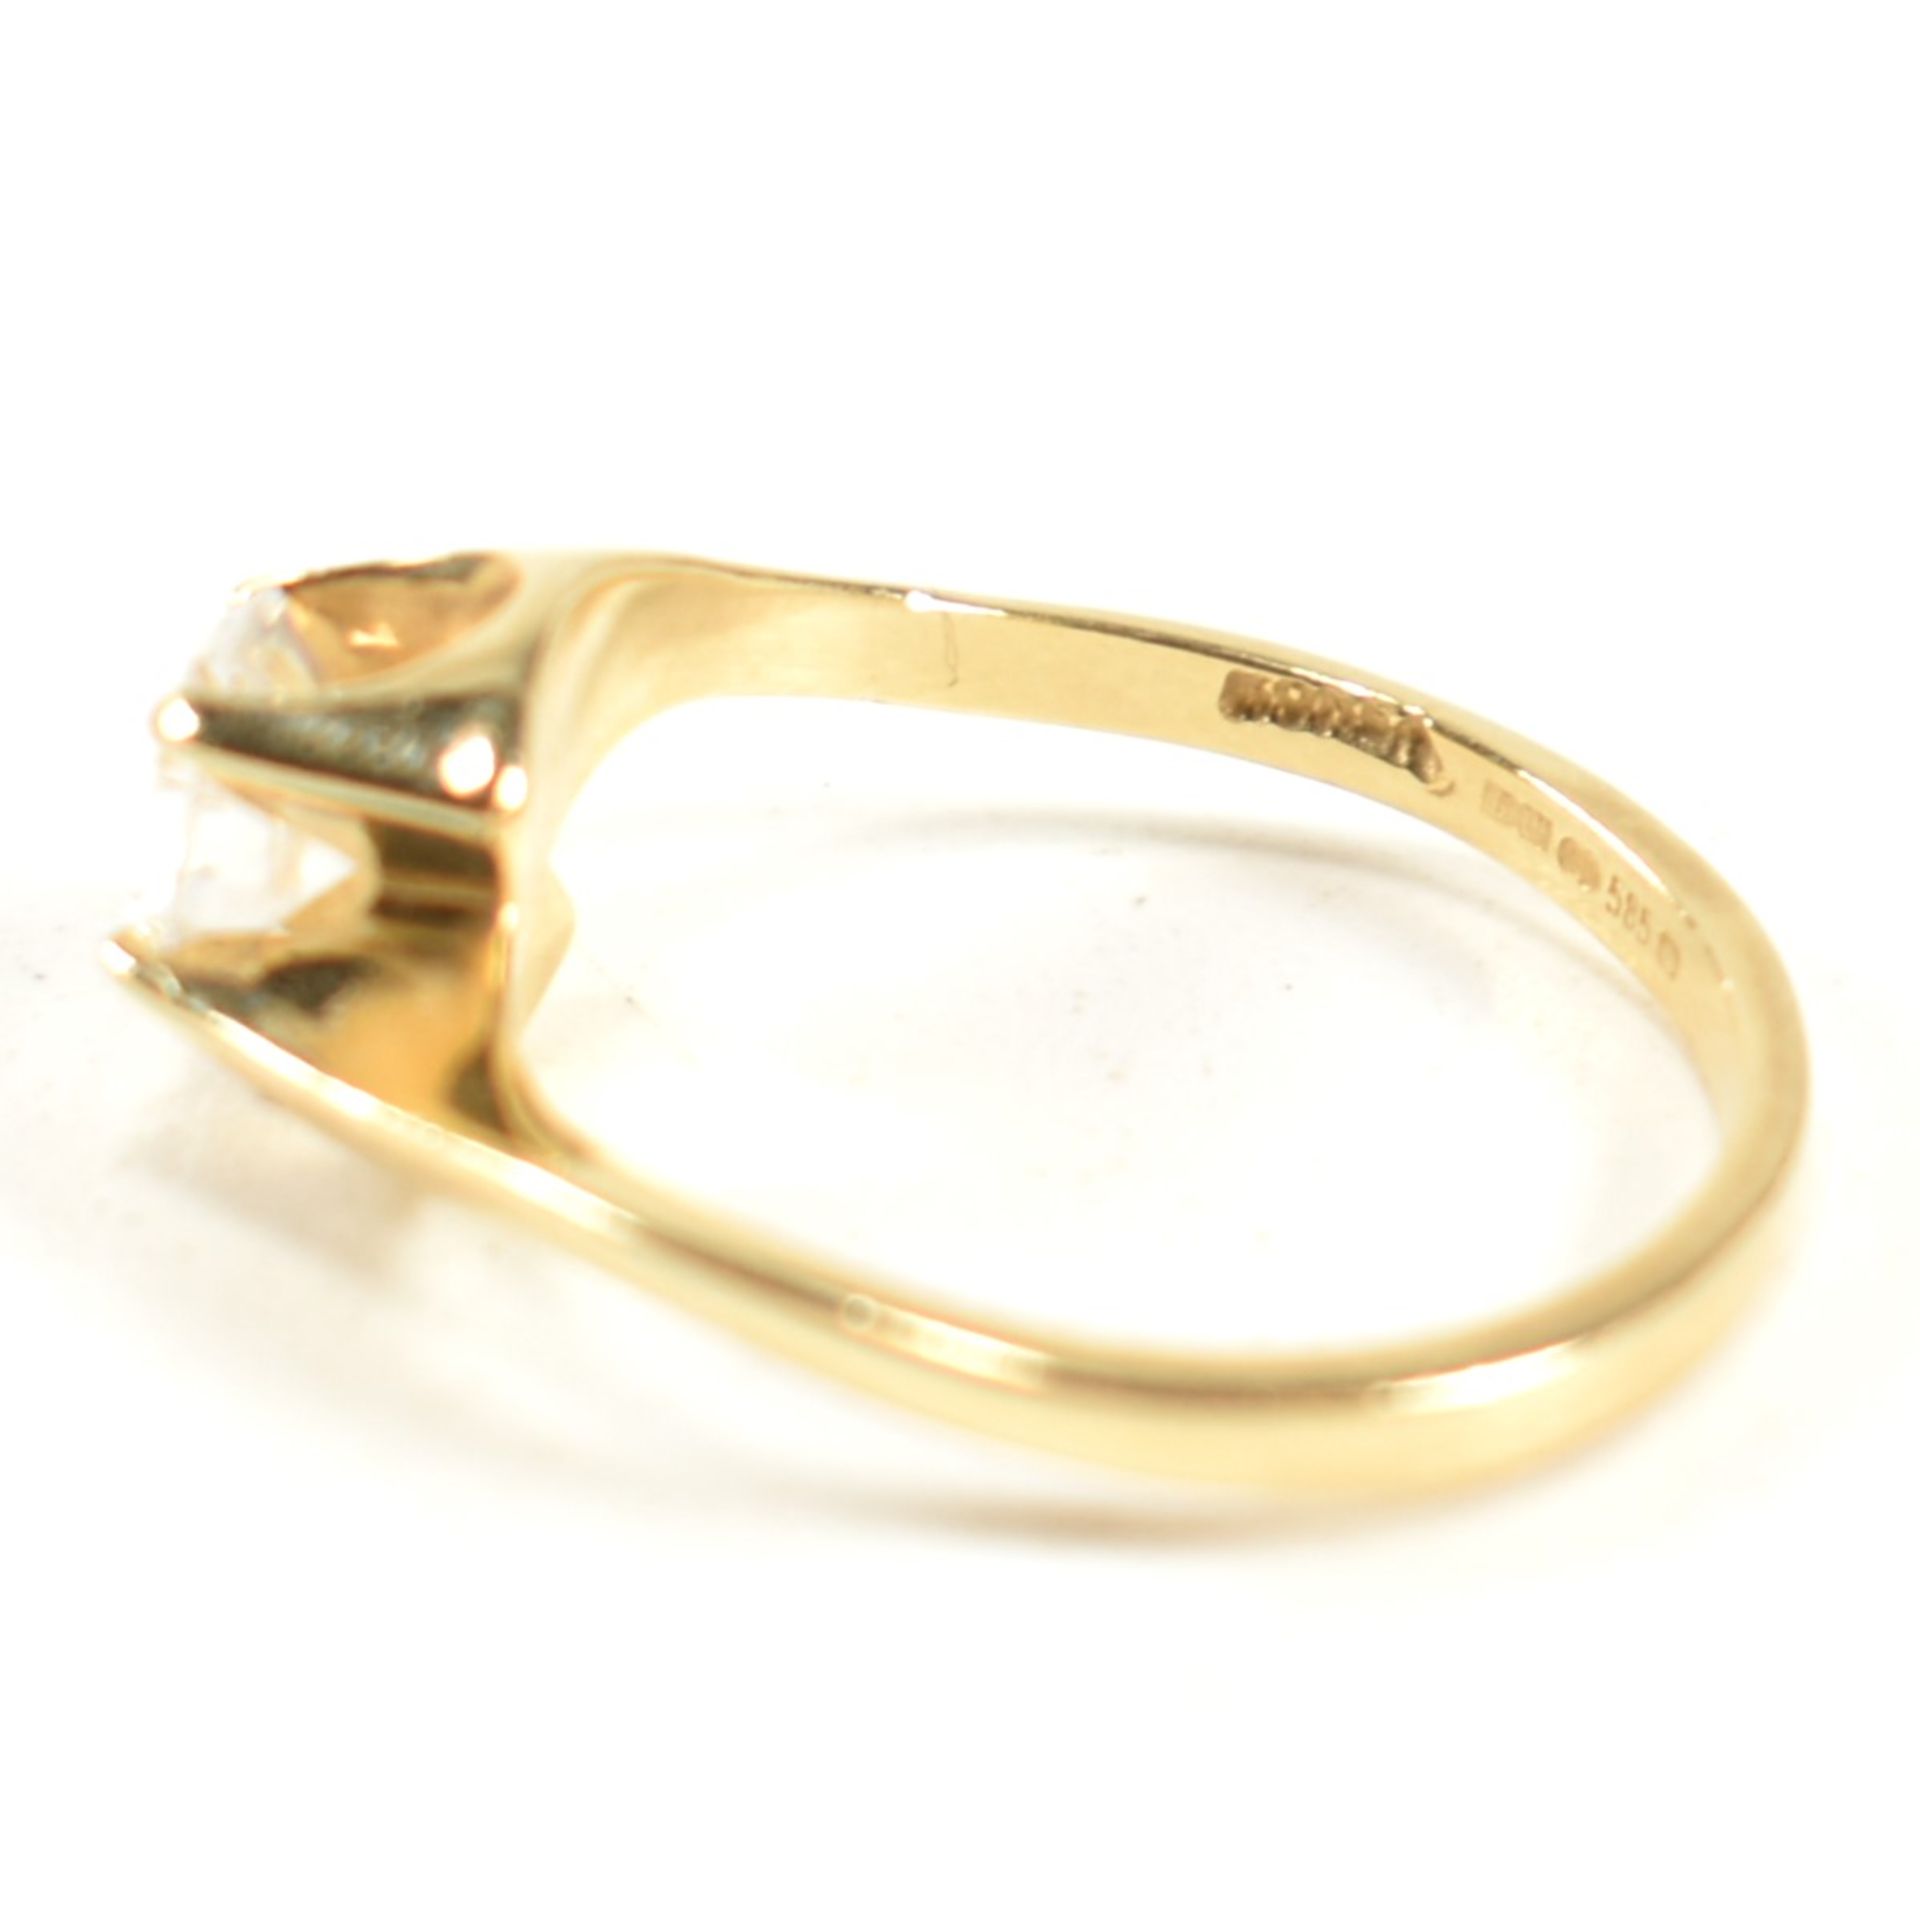 HALLMARKED 14CT GOLD & CZ CROSSOVER RING - Image 6 of 9